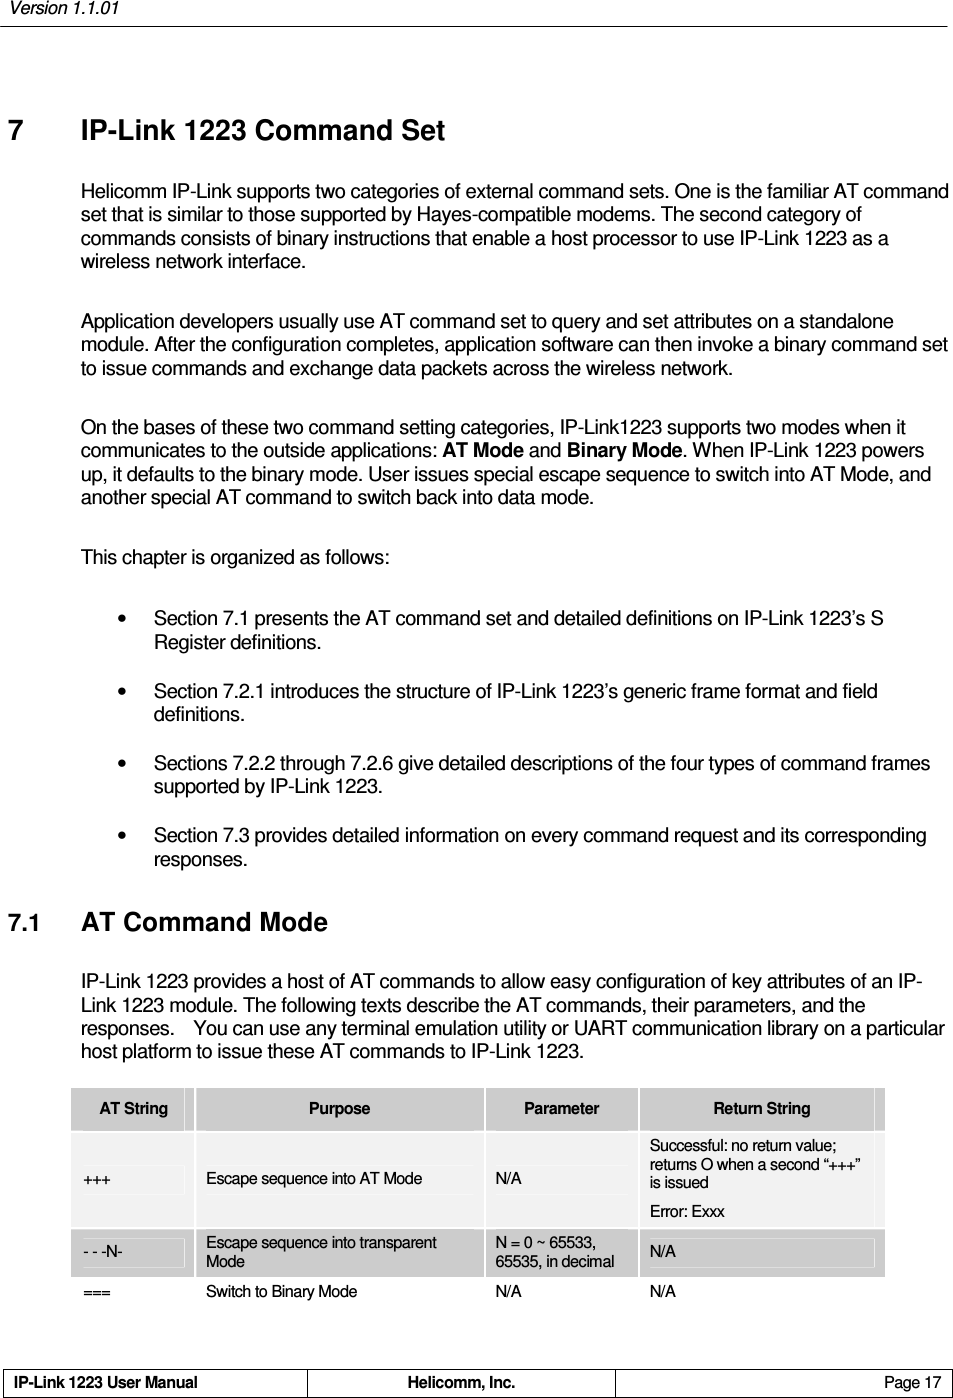 Version 1.1.01     IP-Link 1223 User Manual  Helicomm, Inc.  Page 17   7  IP-Link 1223 Command Set Helicomm IP-Link supports two categories of external command sets. One is the familiar AT command set that is similar to those supported by Hayes-compatible modems. The second category of commands consists of binary instructions that enable a host processor to use IP-Link 1223 as a wireless network interface. Application developers usually use AT command set to query and set attributes on a standalone module. After the configuration completes, application software can then invoke a binary command set to issue commands and exchange data packets across the wireless network. On the bases of these two command setting categories, IP-Link1223 supports two modes when it communicates to the outside applications: AT Mode and Binary Mode. When IP-Link 1223 powers up, it defaults to the binary mode. User issues special escape sequence to switch into AT Mode, and another special AT command to switch back into data mode. This chapter is organized as follows:     •  Section 7.1 presents the AT command set and detailed definitions on IP-Link 1223’s S Register definitions.     •  Section 7.2.1 introduces the structure of IP-Link 1223’s generic frame format and field definitions.   •  Sections 7.2.2 through 7.2.6 give detailed descriptions of the four types of command frames supported by IP-Link 1223.     •  Section 7.3 provides detailed information on every command request and its corresponding responses. 7.1 AT Command Mode IP-Link 1223 provides a host of AT commands to allow easy configuration of key attributes of an IP-Link 1223 module. The following texts describe the AT commands, their parameters, and the responses.    You can use any terminal emulation utility or UART communication library on a particular host platform to issue these AT commands to IP-Link 1223.   AT String  Purpose  Parameter  Return String +++  Escape sequence into AT Mode  N/A Successful: no return value; returns O when a second “+++” is issued Error: Exxx - - -N-  Escape sequence into transparent Mode N = 0 ~ 65533,   65535, in decimal  N/A ===  Switch to Binary Mode  N/A  N/A 